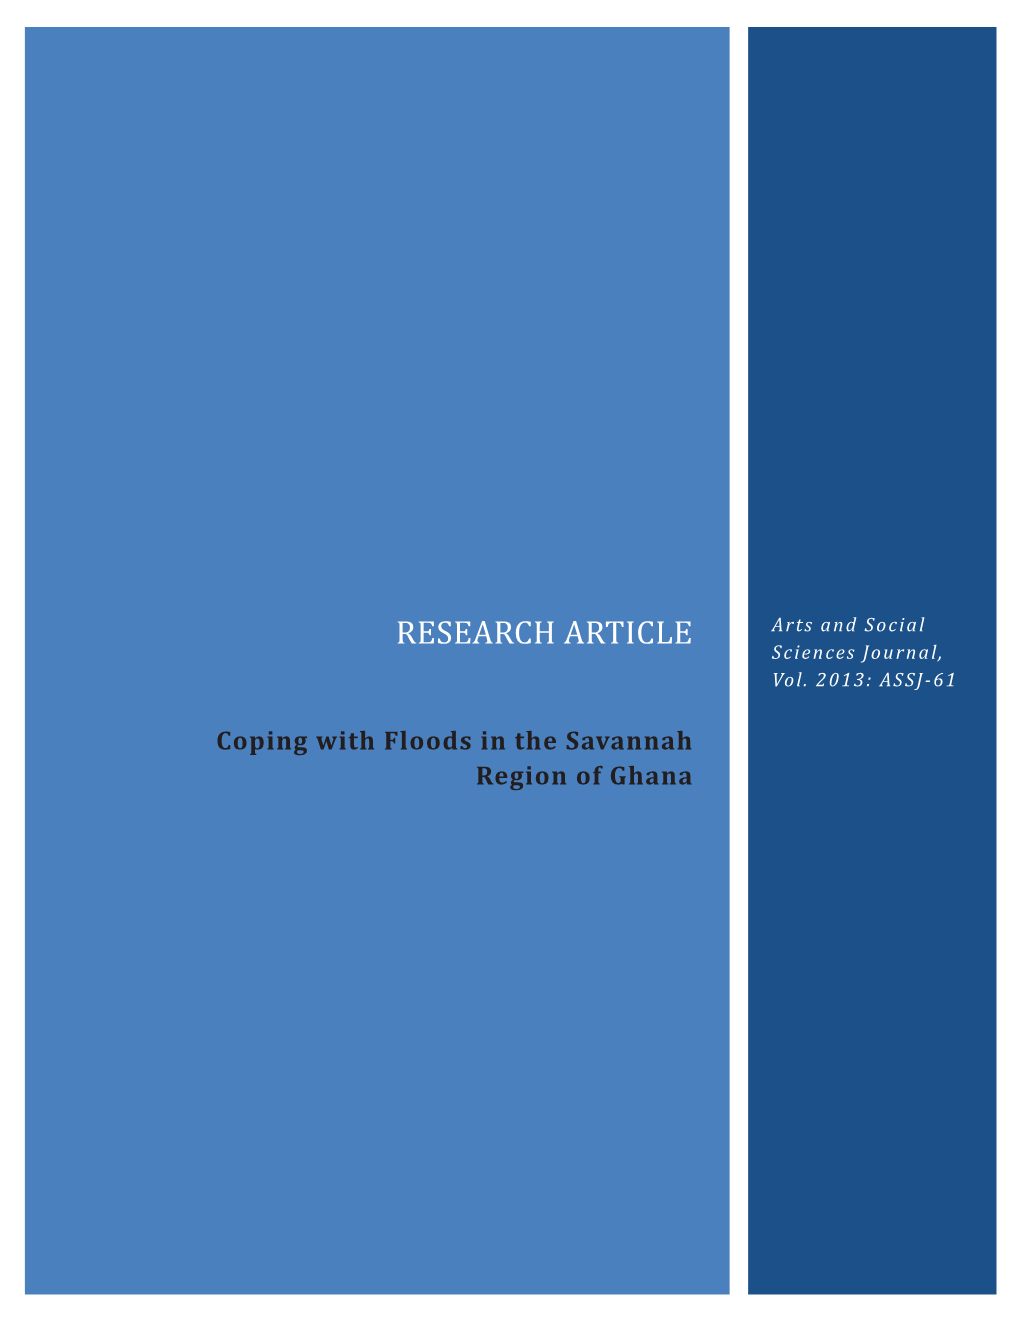 RESEARCH ARTICLE Arts and Social Sciences Journal, Vol